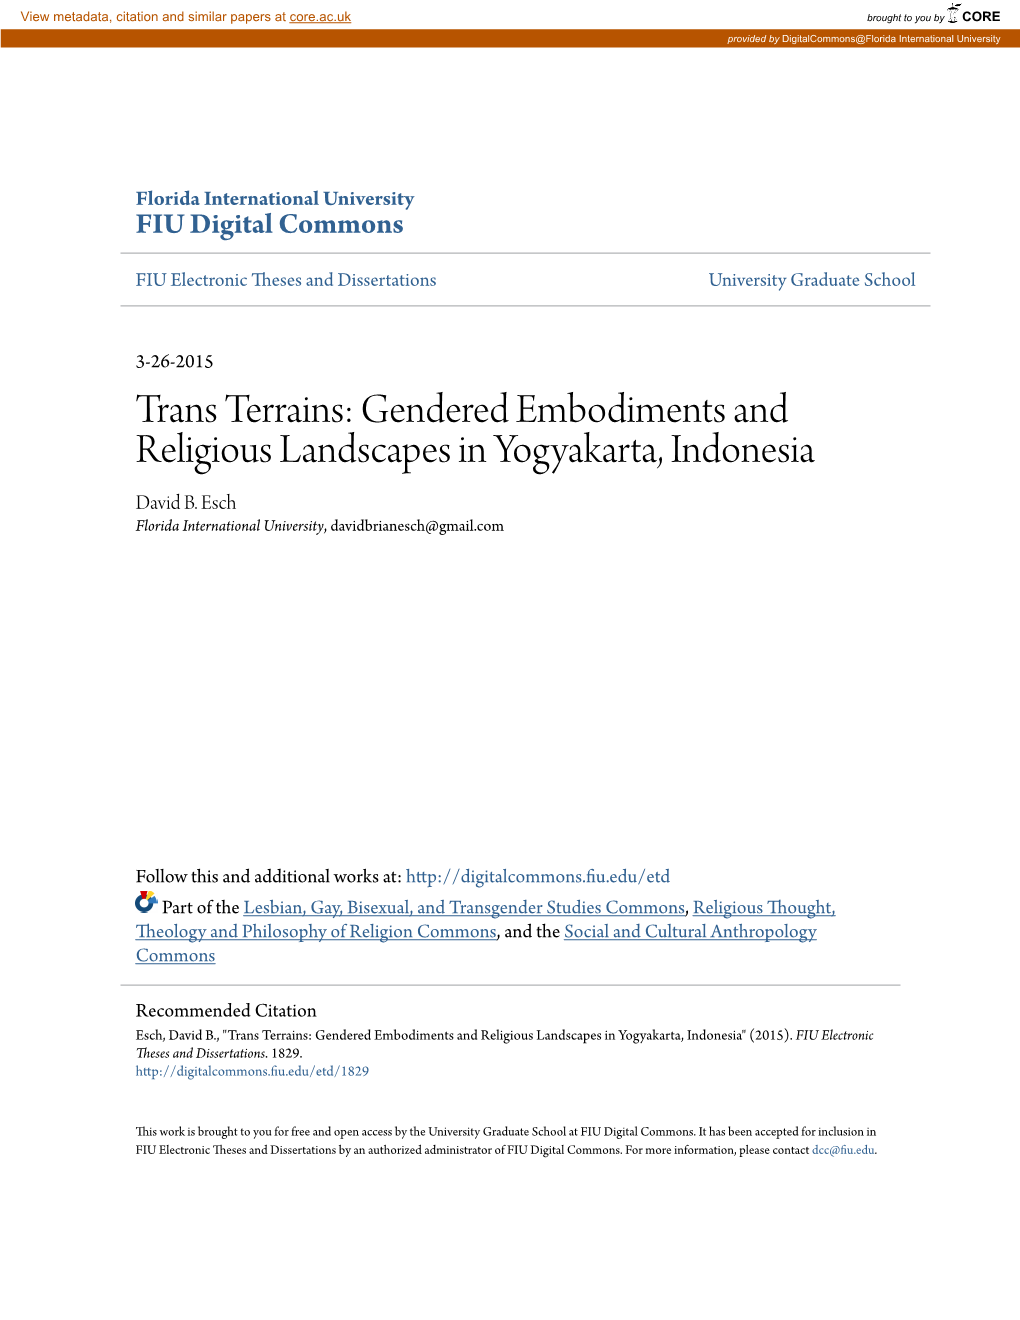 Trans Terrains: Gendered Embodiments and Religious Landscapes in Yogyakarta, Indonesia David B